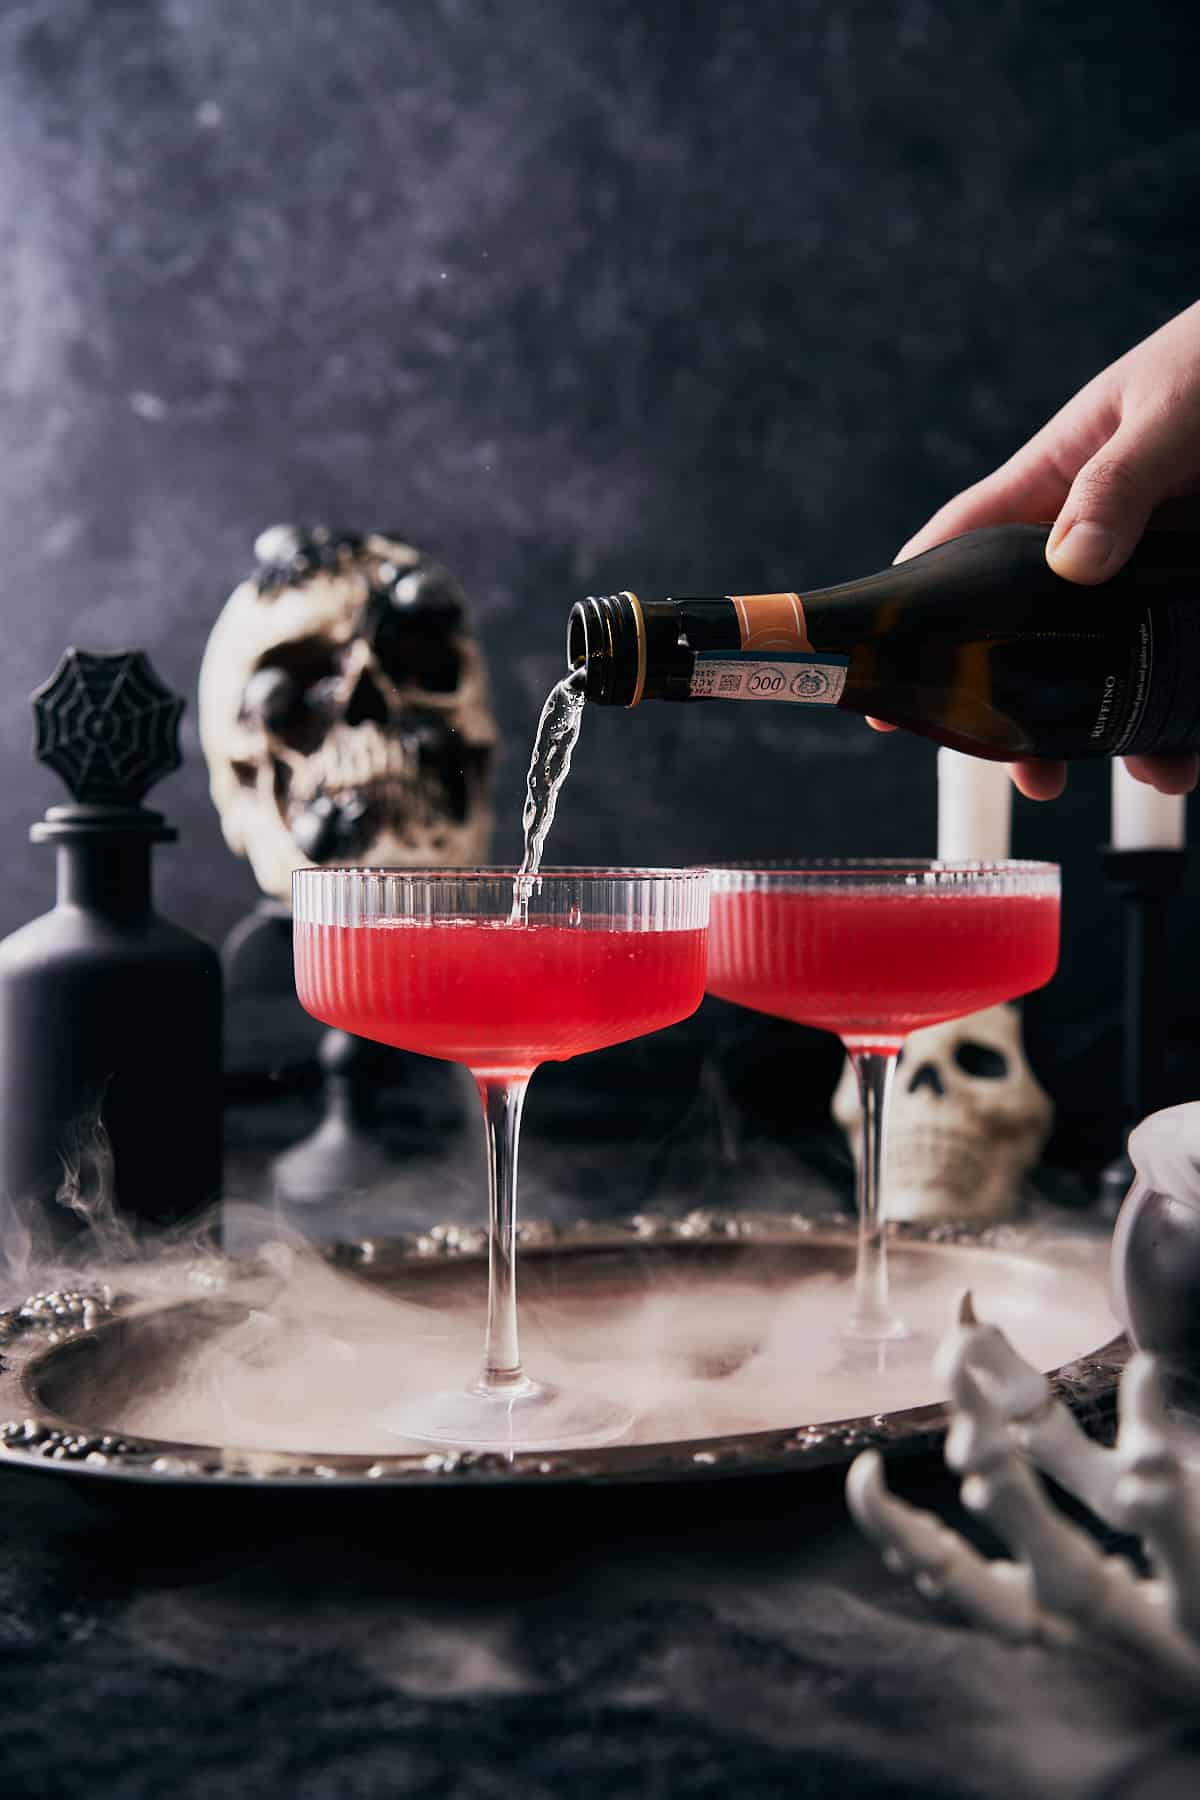 hand pouring sparkling wine into coupe glasses with red liquid inside, on a spooky dark halloween scene with skulls and dry ice.